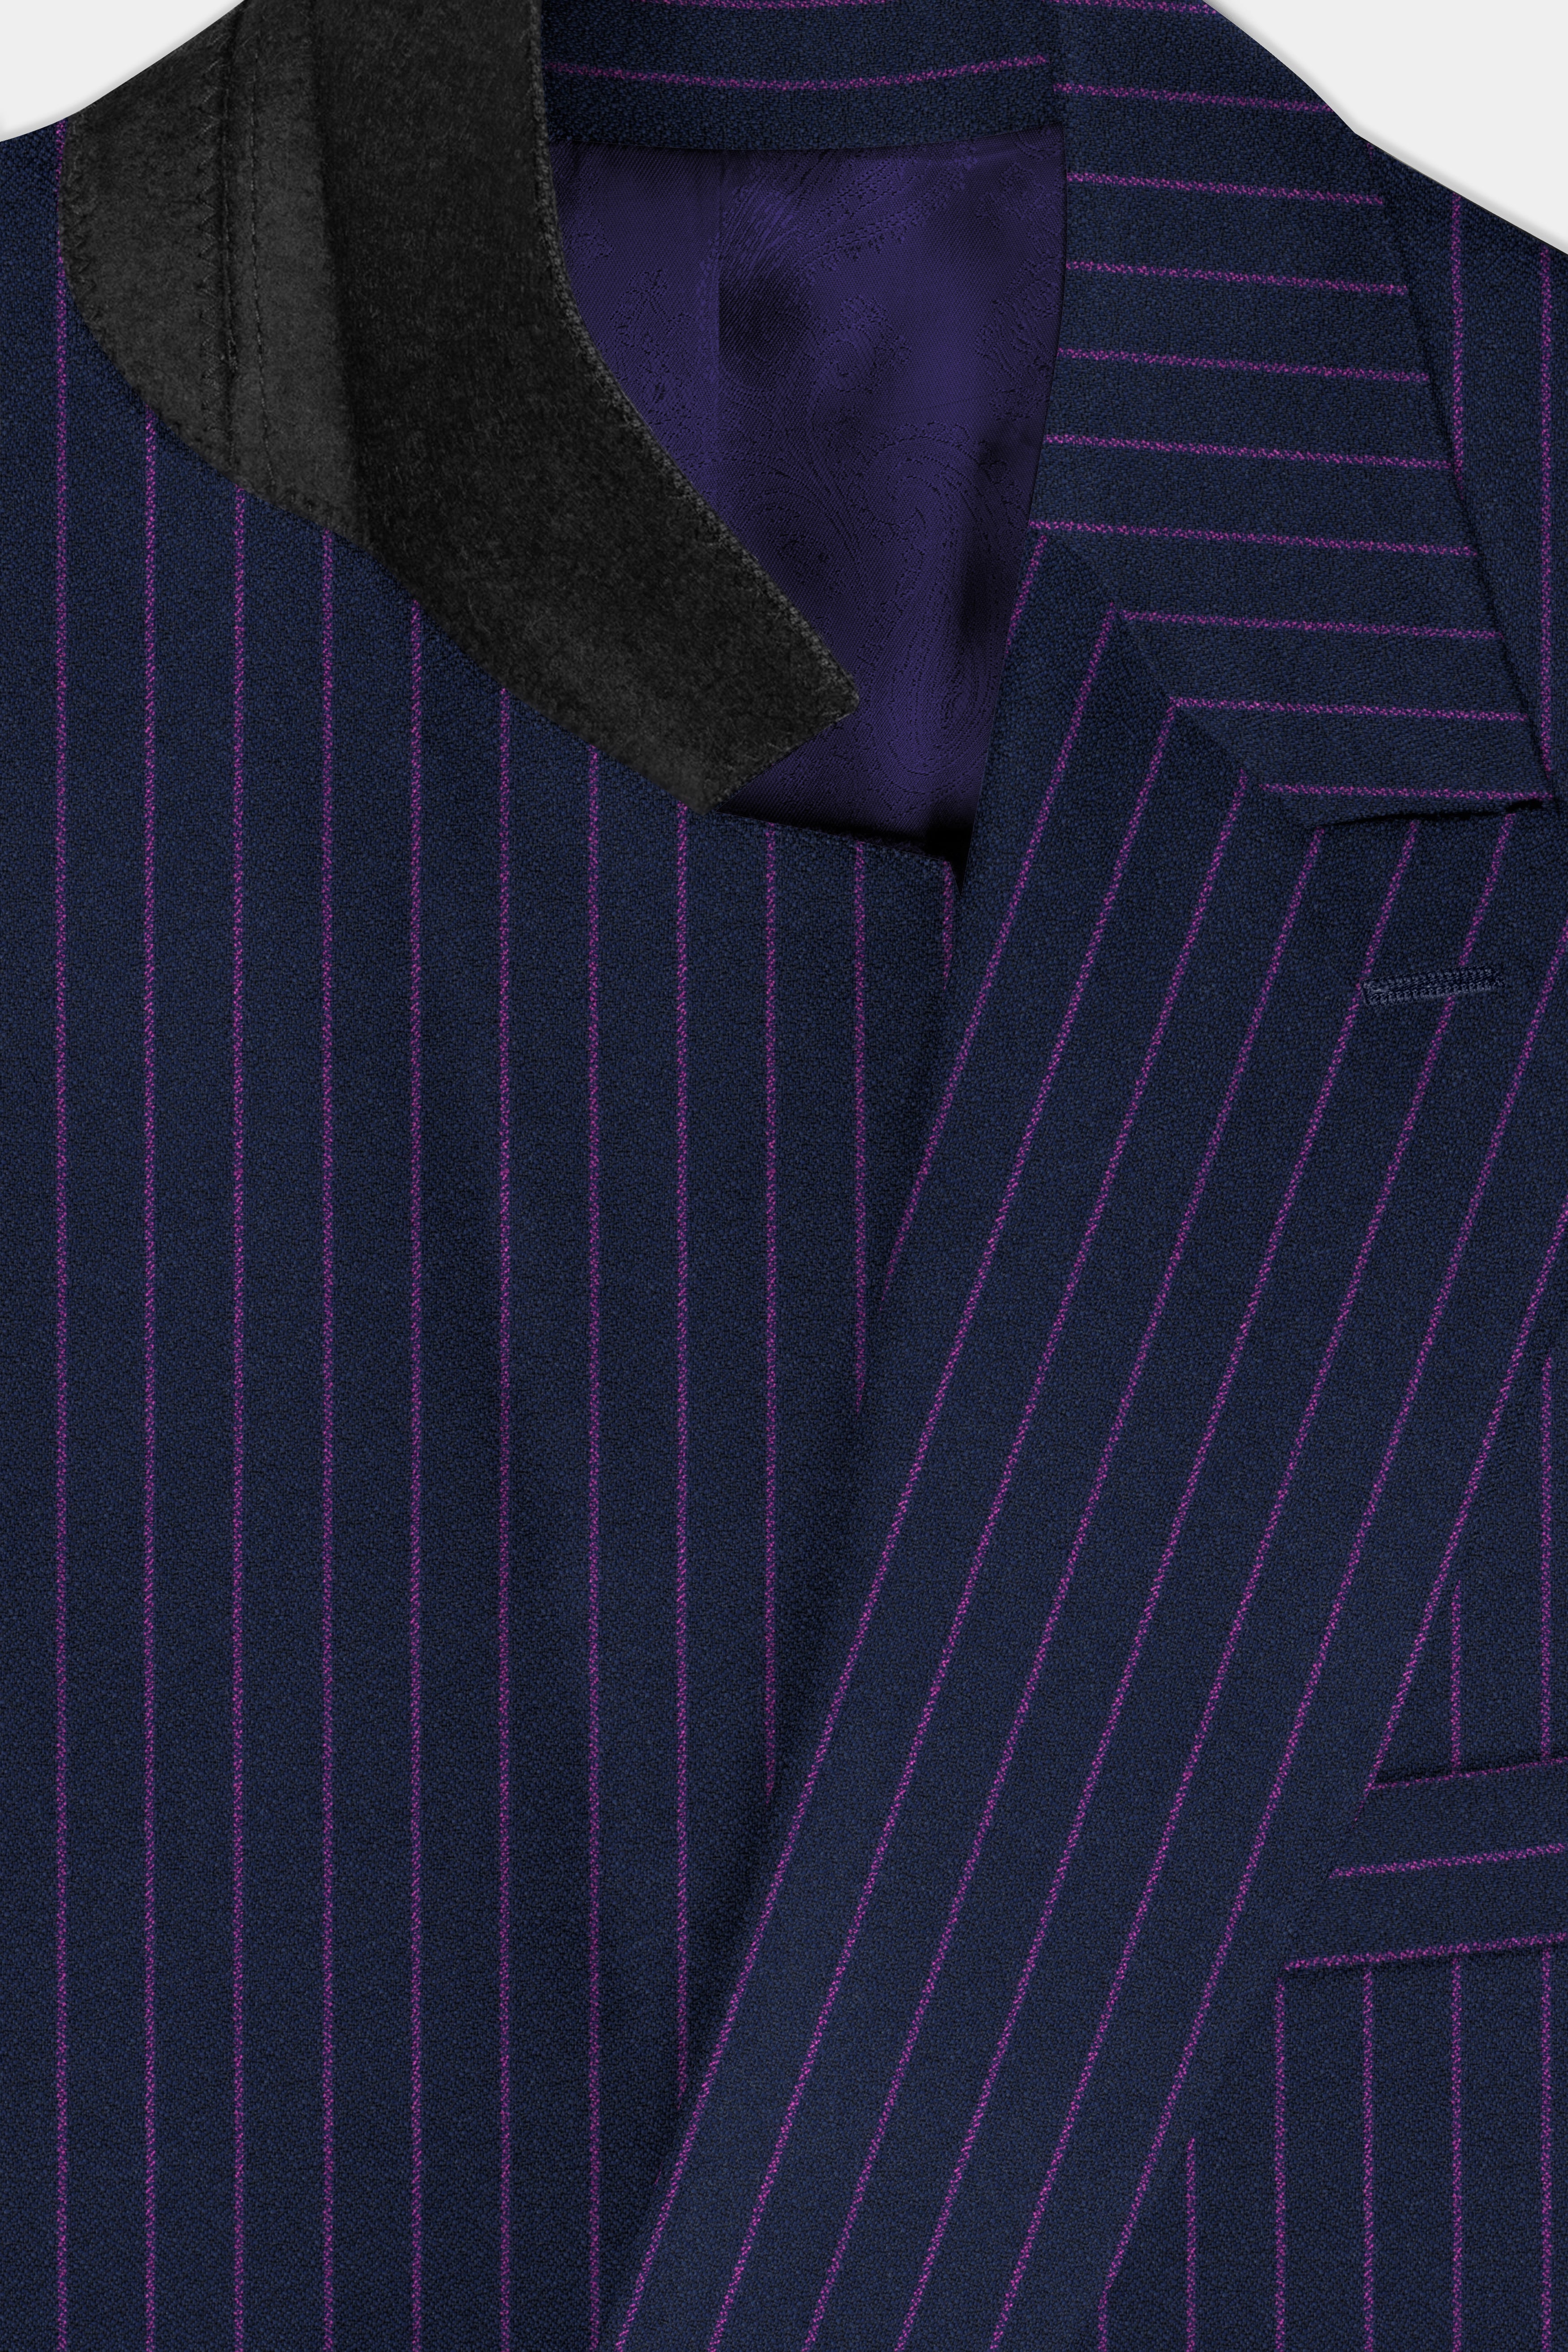 Steel Gray with Grape Purple Striped Wool Blend Double Breasted Blazer